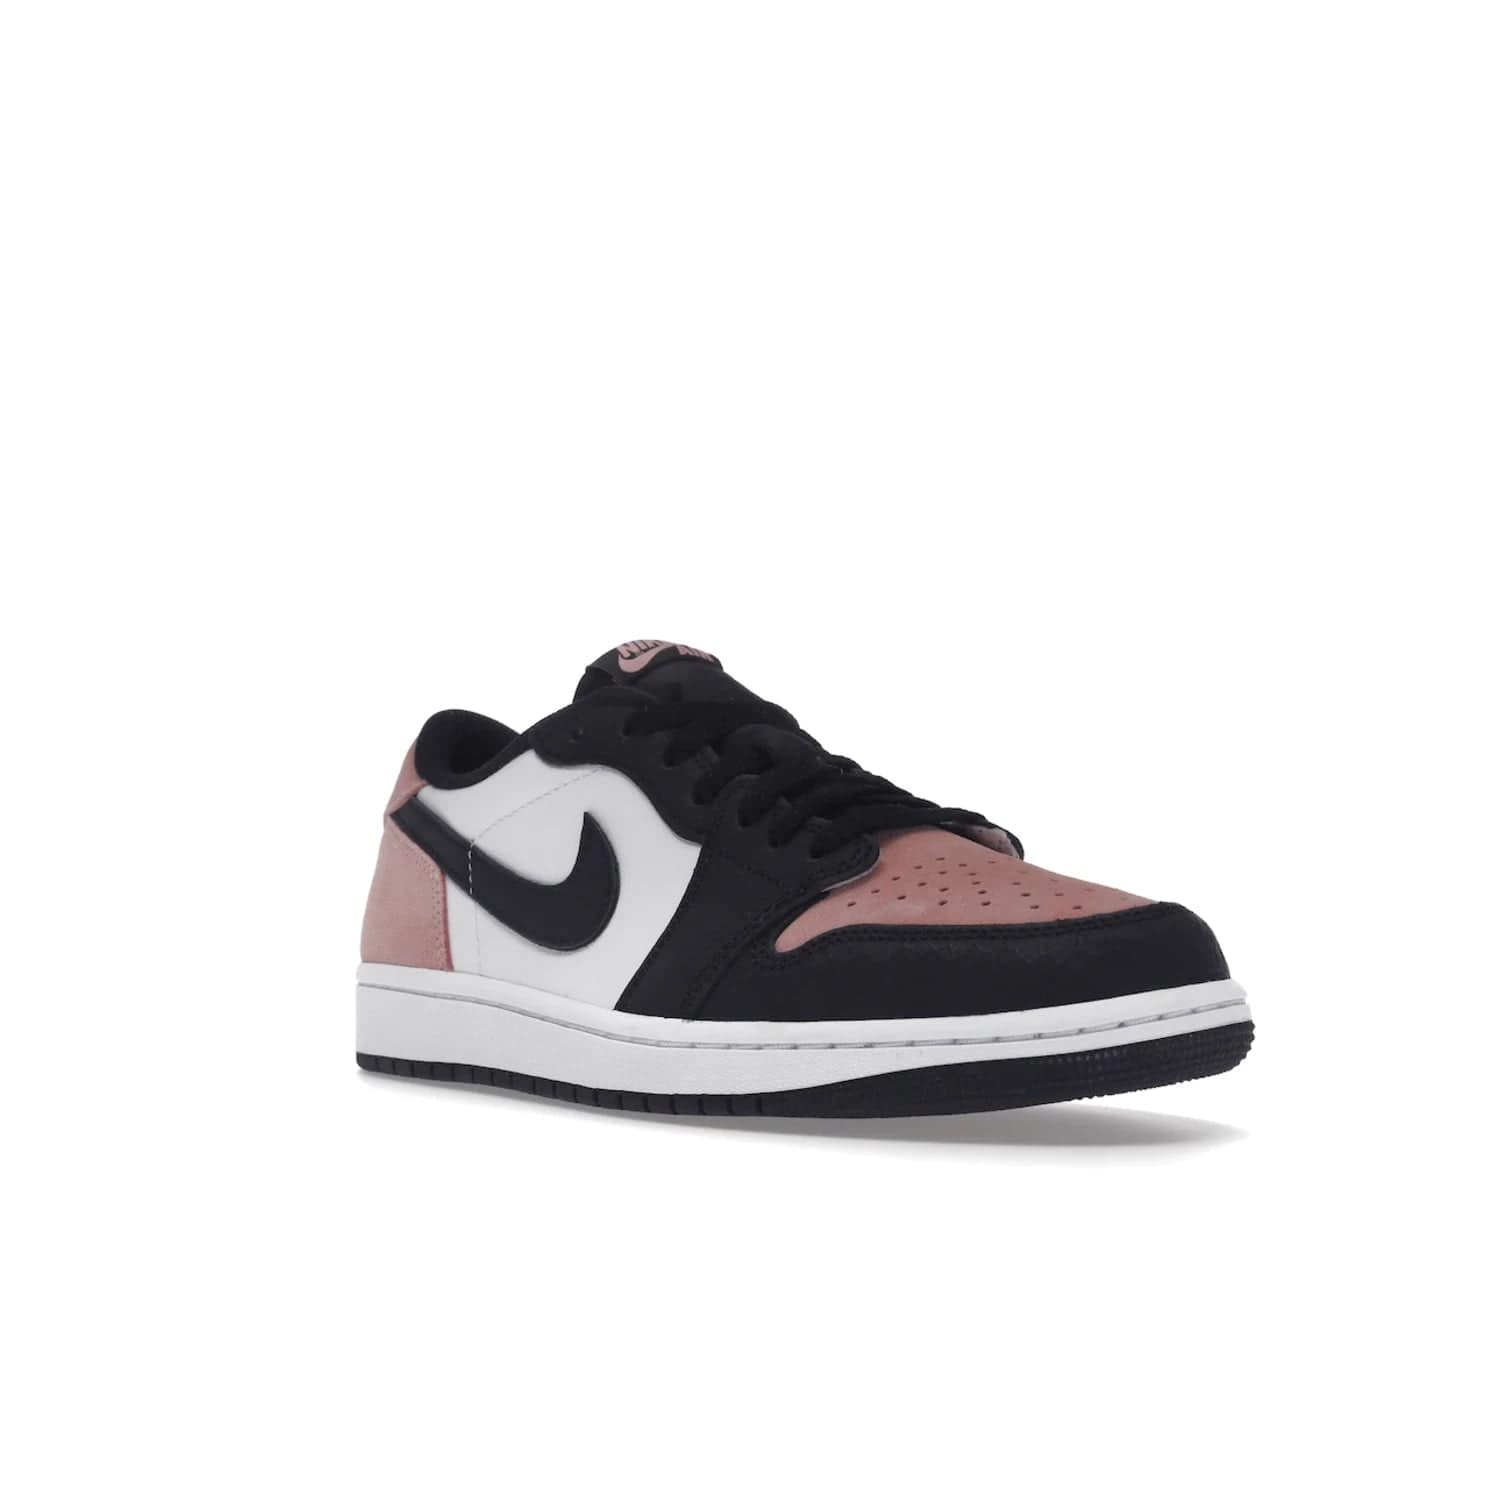 Jordan 1 Low OG Bleached Coral - Image 6 - Only at www.BallersClubKickz.com - Introducing the Air Jordan 1 Low OG Bleached Coral. Constructed with white leather, black cracked leather & Bleached Coral suede. Signature Jordan Wings logo, white Air sole. Get the pack in July 2022 and stand out.